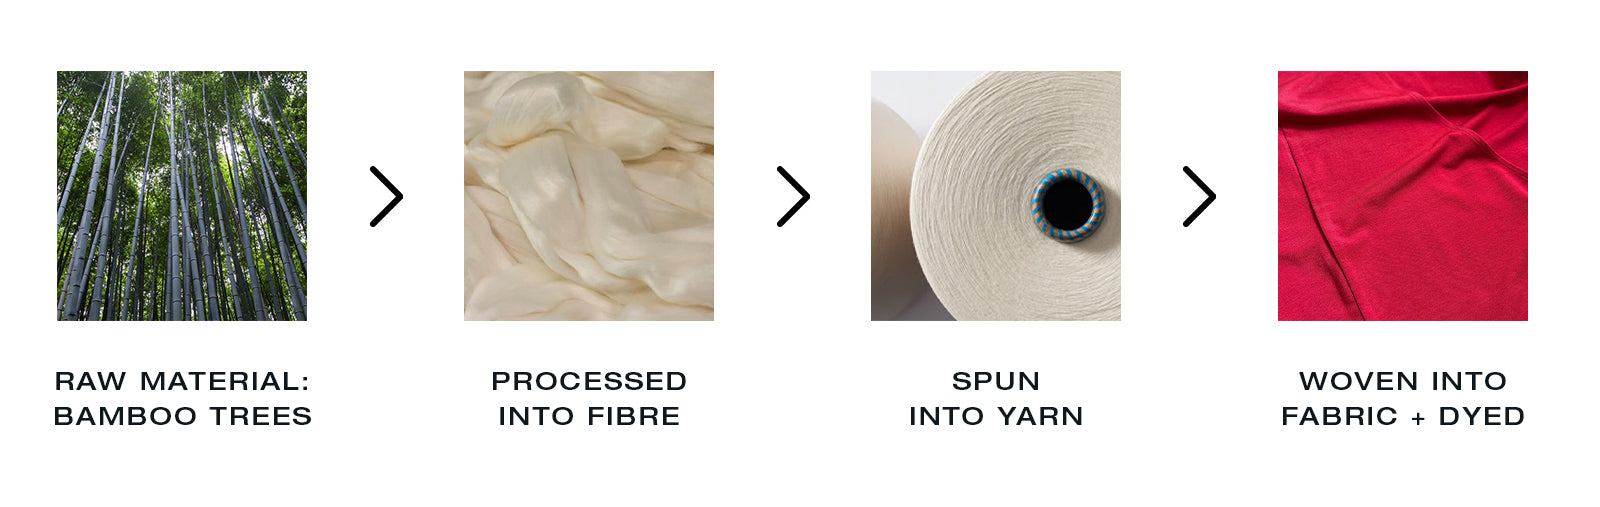 Infographic showing the stages of bamboo fabric production